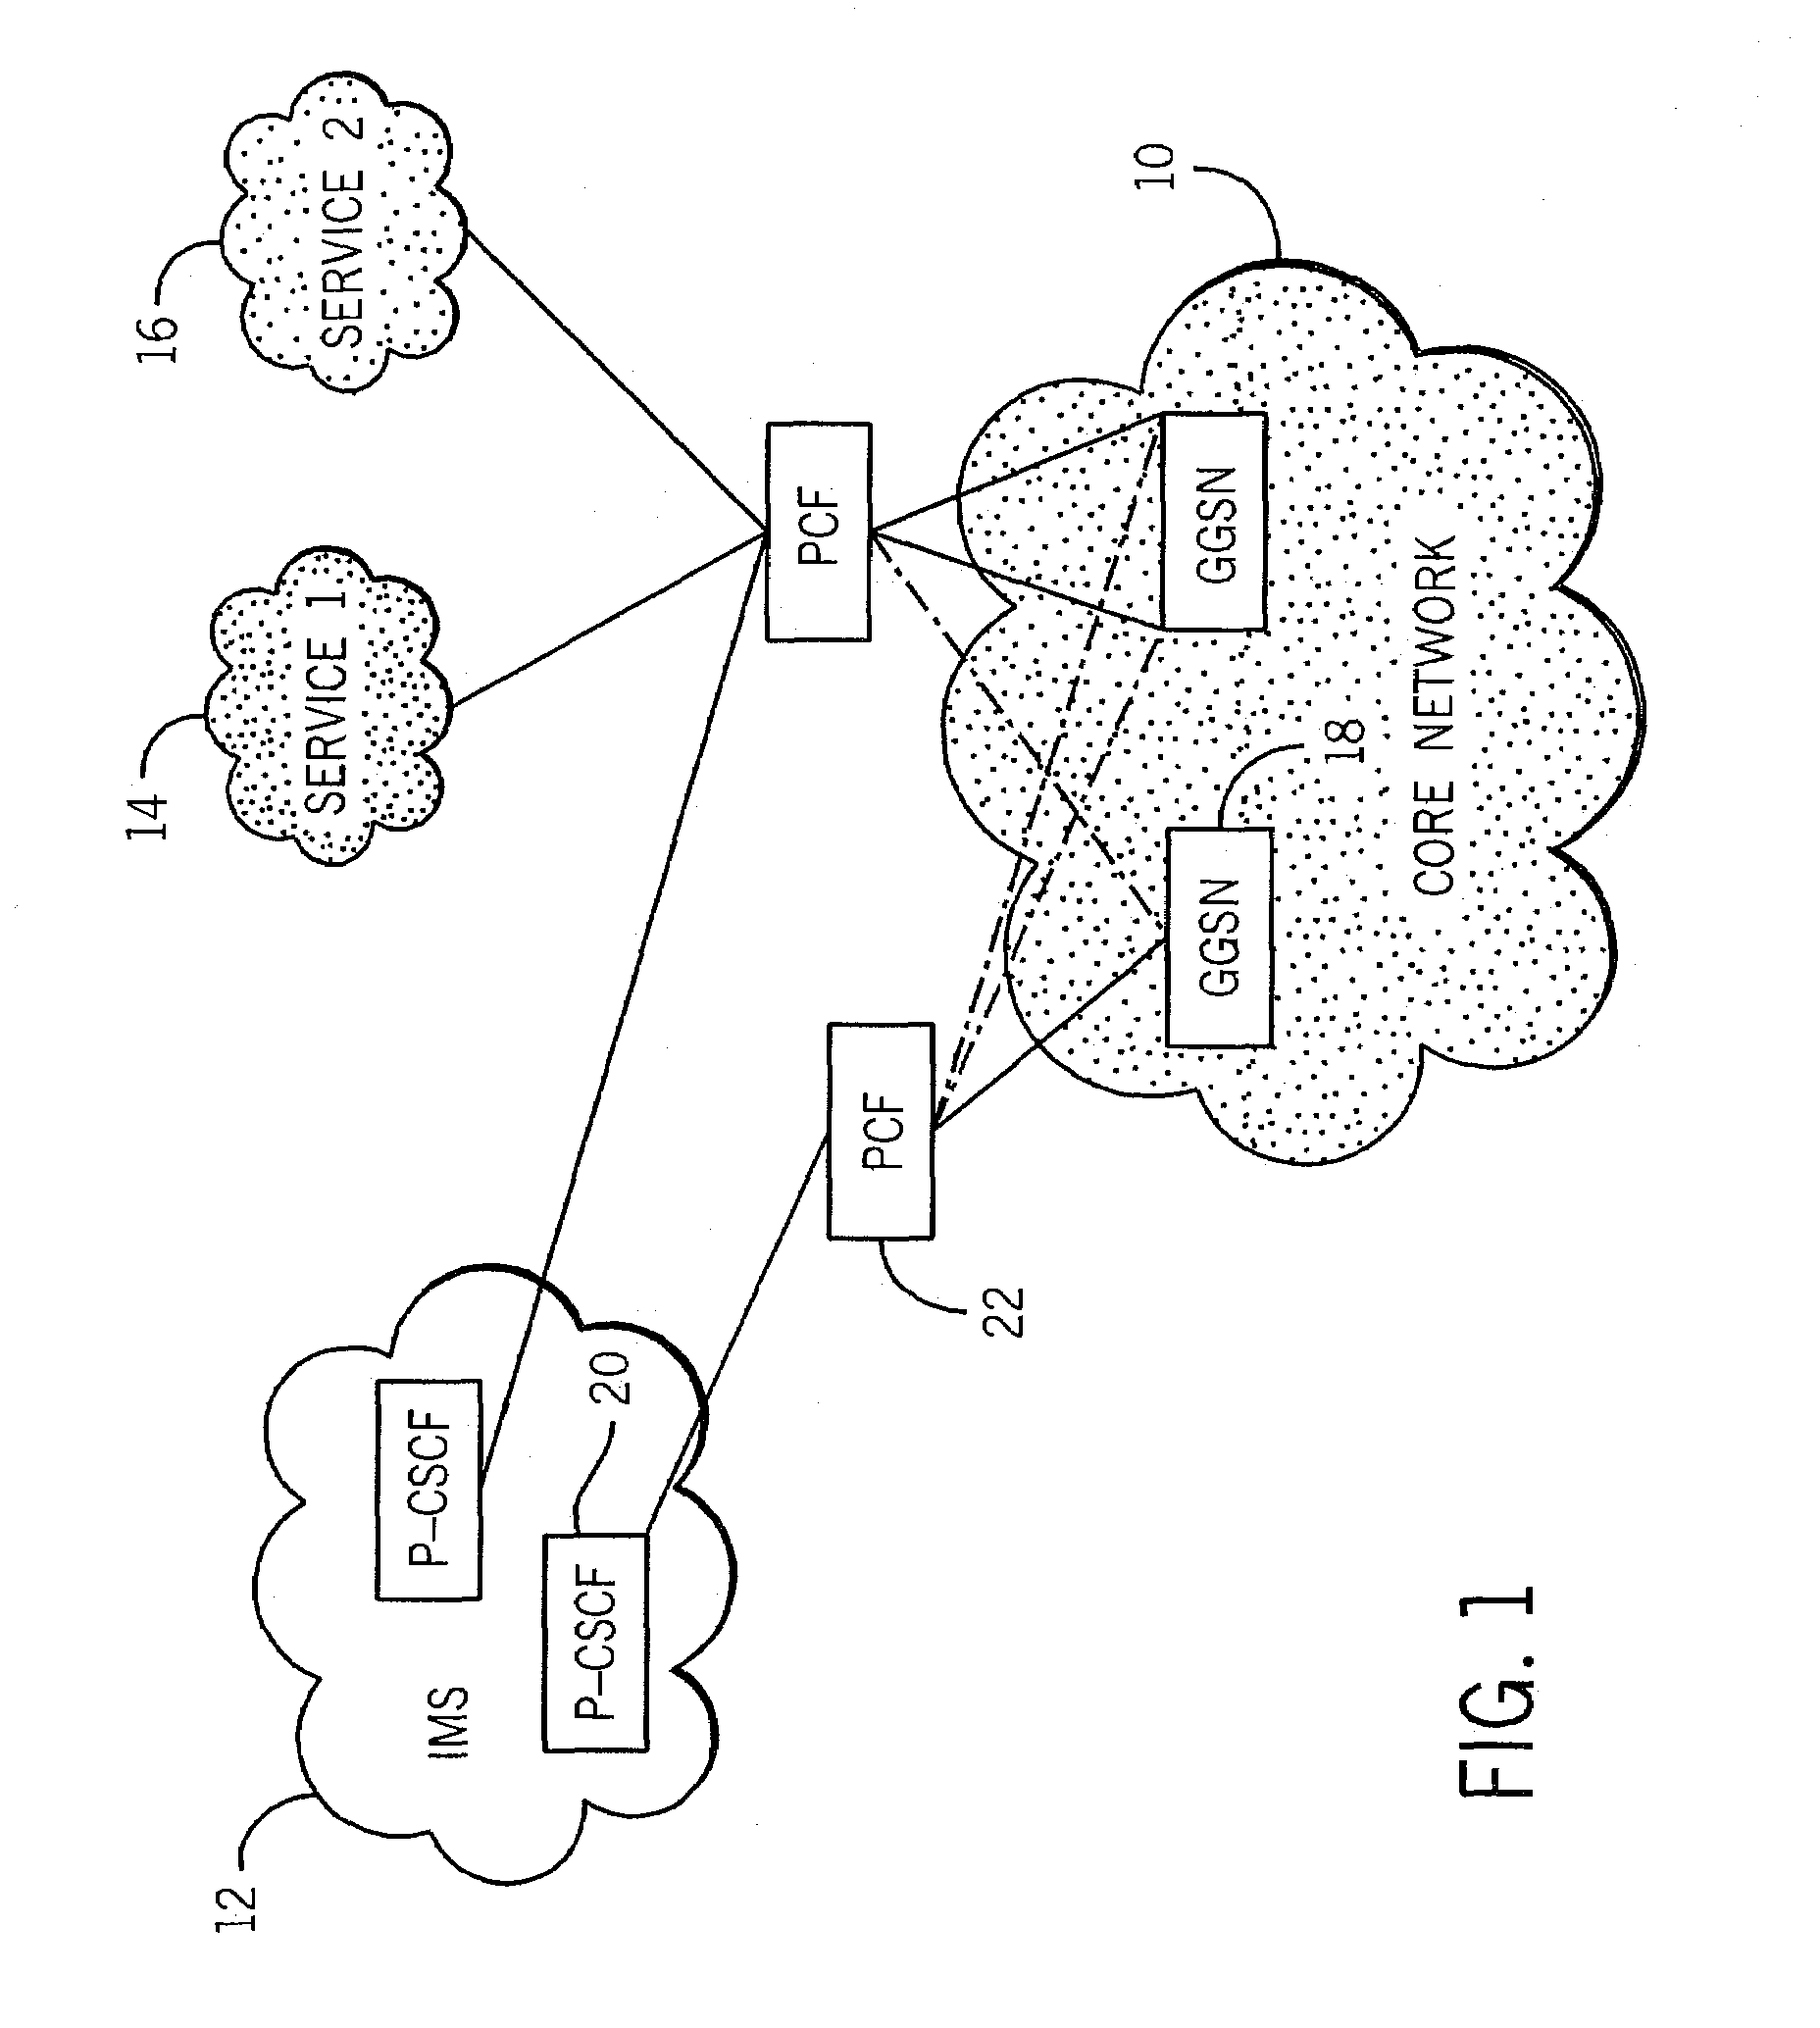 System and method with policy control function for multimedia broadcast/multicast system services